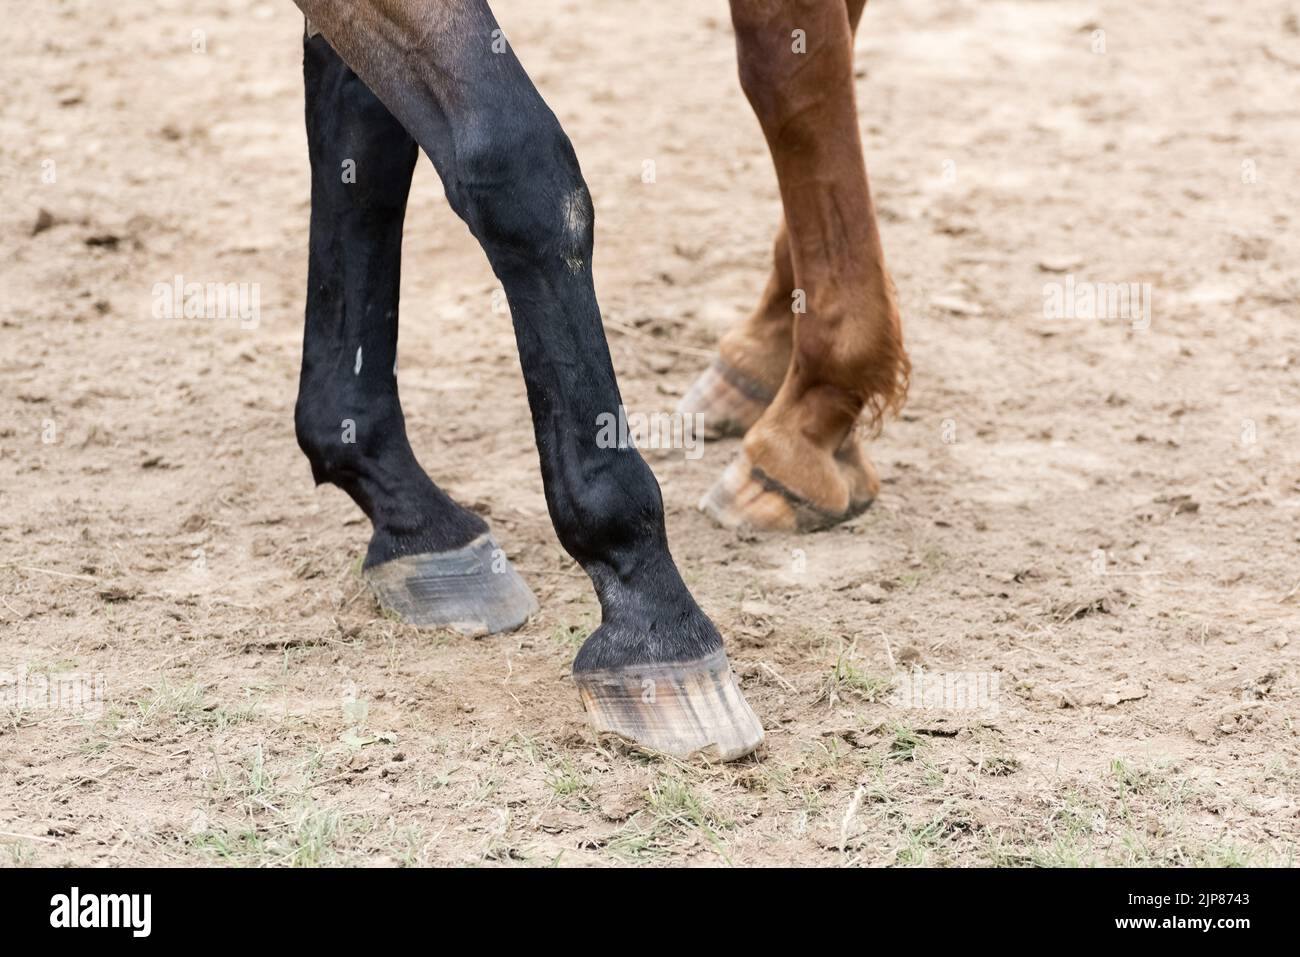 Legs and hooves of two warmblood horses in Germany, Europe Stock Photo